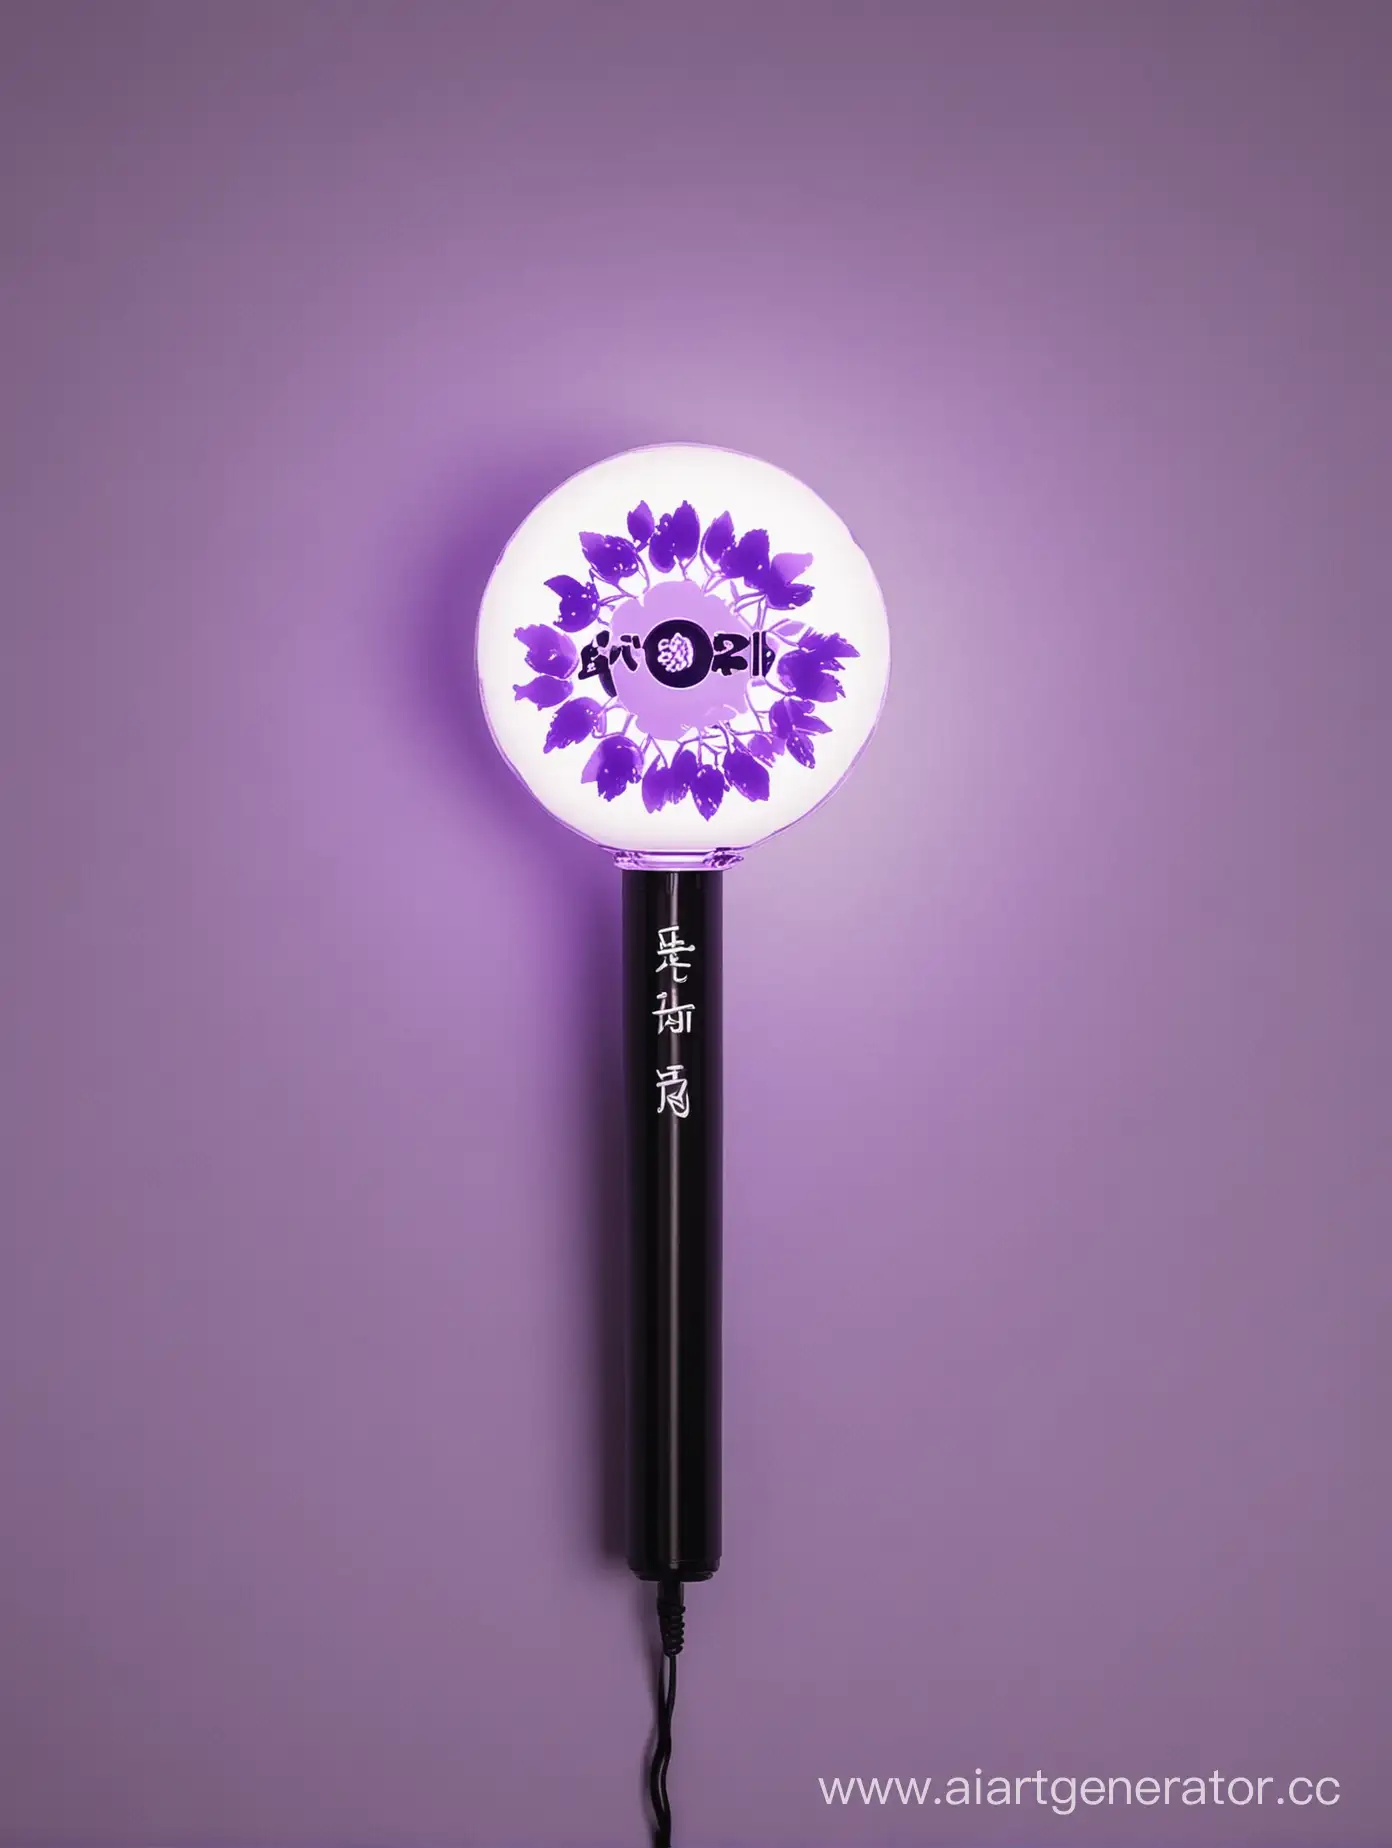 ROPHILES-Kpop-Group-Round-Lightstick-with-Purple-Black-and-White-Design-featuring-Flower-Figures